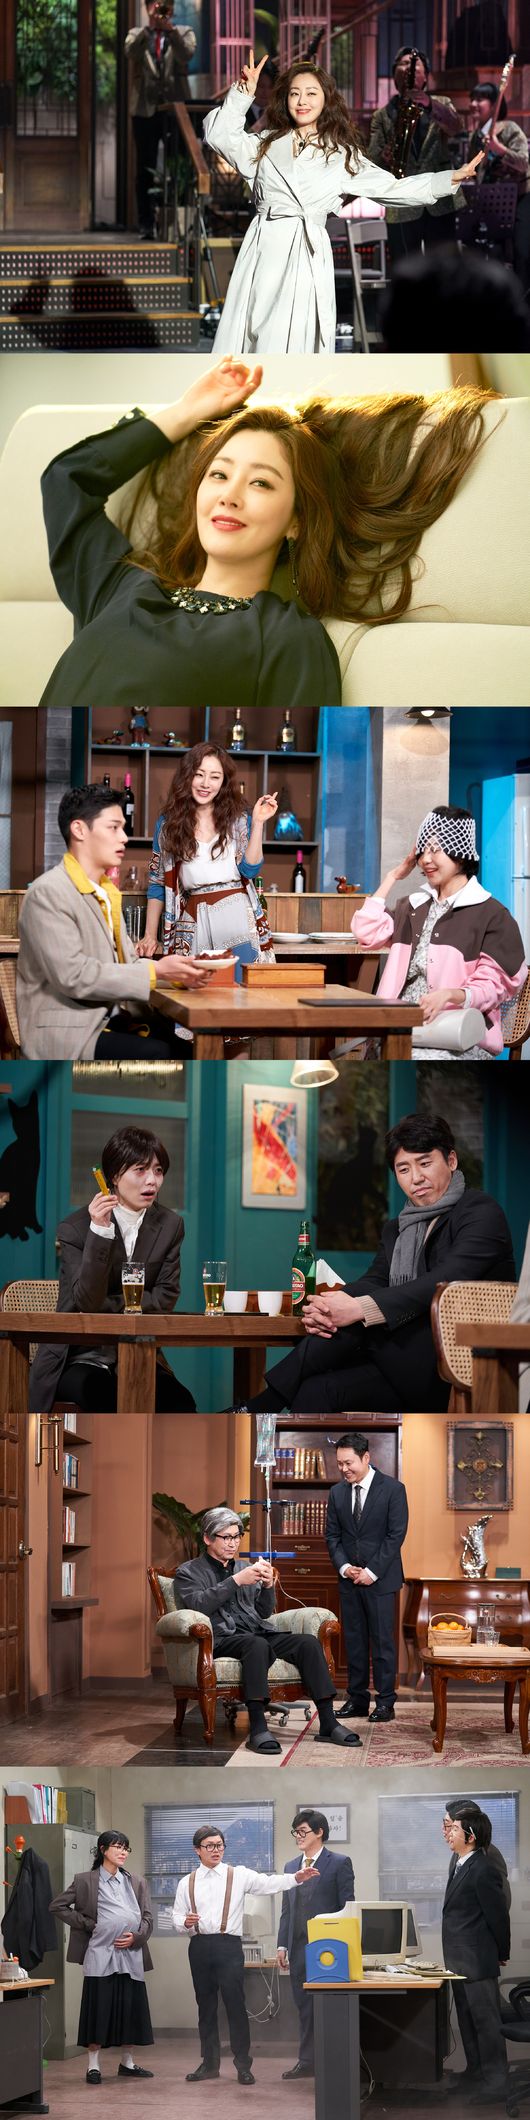 Coupang Plays original comedy show SNL Korea Season 2 (production AKahaani), which delivers high-quality laughter with outspoken satire, parody and fresh humor, will draw attention by foreshadowing the 14th broadcast with host Oh Na-ra on April 16.Actor Oh Na-ra, who brings vitality to the drama with the character digestion power like every work by going between the screen and the screen.Actor Oh Na-ra, who has recently taken over the entertainment industry with Six Sense, announced on the 16th that he will perform as a host of SNL Korea Season 2 14 times.Oh Na-ra, who has a full atmosphere with energy cheerleading from the opening stage, is expected to completely attract viewers on the coming Saturday night with a solid acting ability and a unique stage control, perfecting the colorful contest that can be enjoyed only in SNL.First of all, it captures attention with the new concept digital short corner Hello, My Dolly Girlfriend Preso, which connects SNLs Legend Corner 3 Minute Series.Oh Na-ra transforms into a variety of concepts such as Hello and My Dolly Girlfriend, such as Wannas (completely my style), which resembles famous YouTubers, tastes and fashion tastes, and explodes irresistible charm.In the corner My Uncle, the character Jung Hee in the drama of the same name is revived in the SNL table contest and adds to the pleasure.After breaking up with Shin Dong-yup, who became a monk, he laughed at all the couples who came to the store with anger about it.In particular, Ahn Young-mi and Kim Sang-hyup, who are divided into IU and Lee Sun-gyun, will share a smile with the anger-inducing couple acting.Finally, in the corner The Leader: A Woman Who Reads Books, where Oh Na-ra turned into a star voice actor in audiobooks, the 19th gold veteran Shin Dong-yup adds to the expectation that Nongik will show off his concert breathing.Oh Na-ras breathtaking reading skill, which invokes genres from Hwang Soon-wons Showers to ordinary Baeksuk recipes, will capture viewers with a hot smile more than ever.SNL Korea, which melts the materials captured in reality, also attracts attention.In the Fantasy of Love VS Reality corner, which Oh Na-ra divided into love 22 years love advisor, fantasy love and real love are compared.Especially, Oh Jin-taek of Solo Hell as a fantasy man like fantasy is gathering attention with a cameo, and Kahaani, a real-life sympathy love love completed with perfect tikitaka of Kwon Hyuk-soo and Jung-rang, makes a laugh.In the corner 2022 VS 1990, which compares modern and past K workplace life, it will bring out generations of empathy by showing the workers of two eras who have changed from one to ten.SNL Korea Season 2, which includes all the hot issues and realistic smiles that stimulate consensus, is released every Saturday night at 10 pm through Coupang Play.SNL Korea Season 2